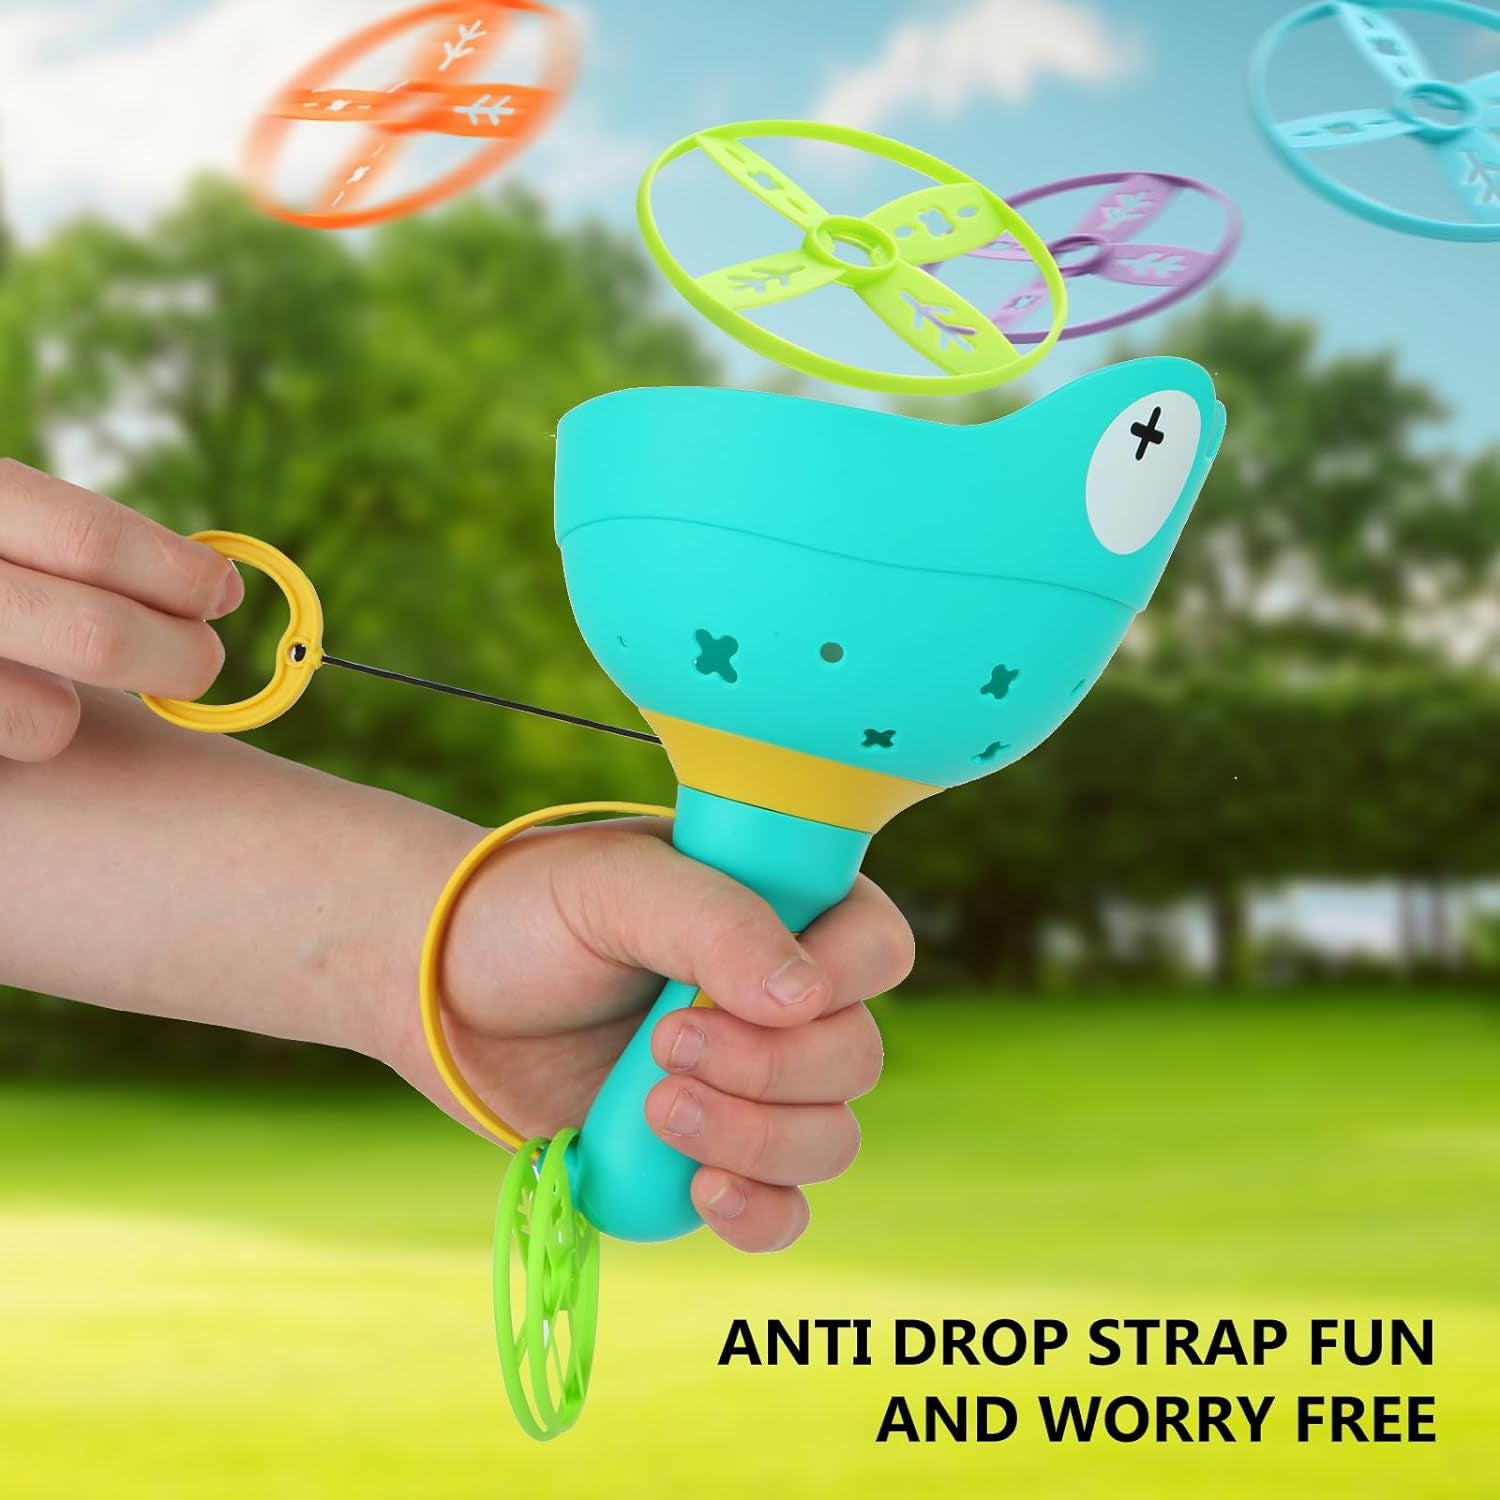 Outdoor Toys for Kids Ages 4-8: Flying Disc Launcher Toys Manual Capture Catching Outdoor Games for 3 4 5 6 7 8 Years Old - outside Toys for Toddlers 3-5 Christmas Easter Birthday Gifts Boys Girls